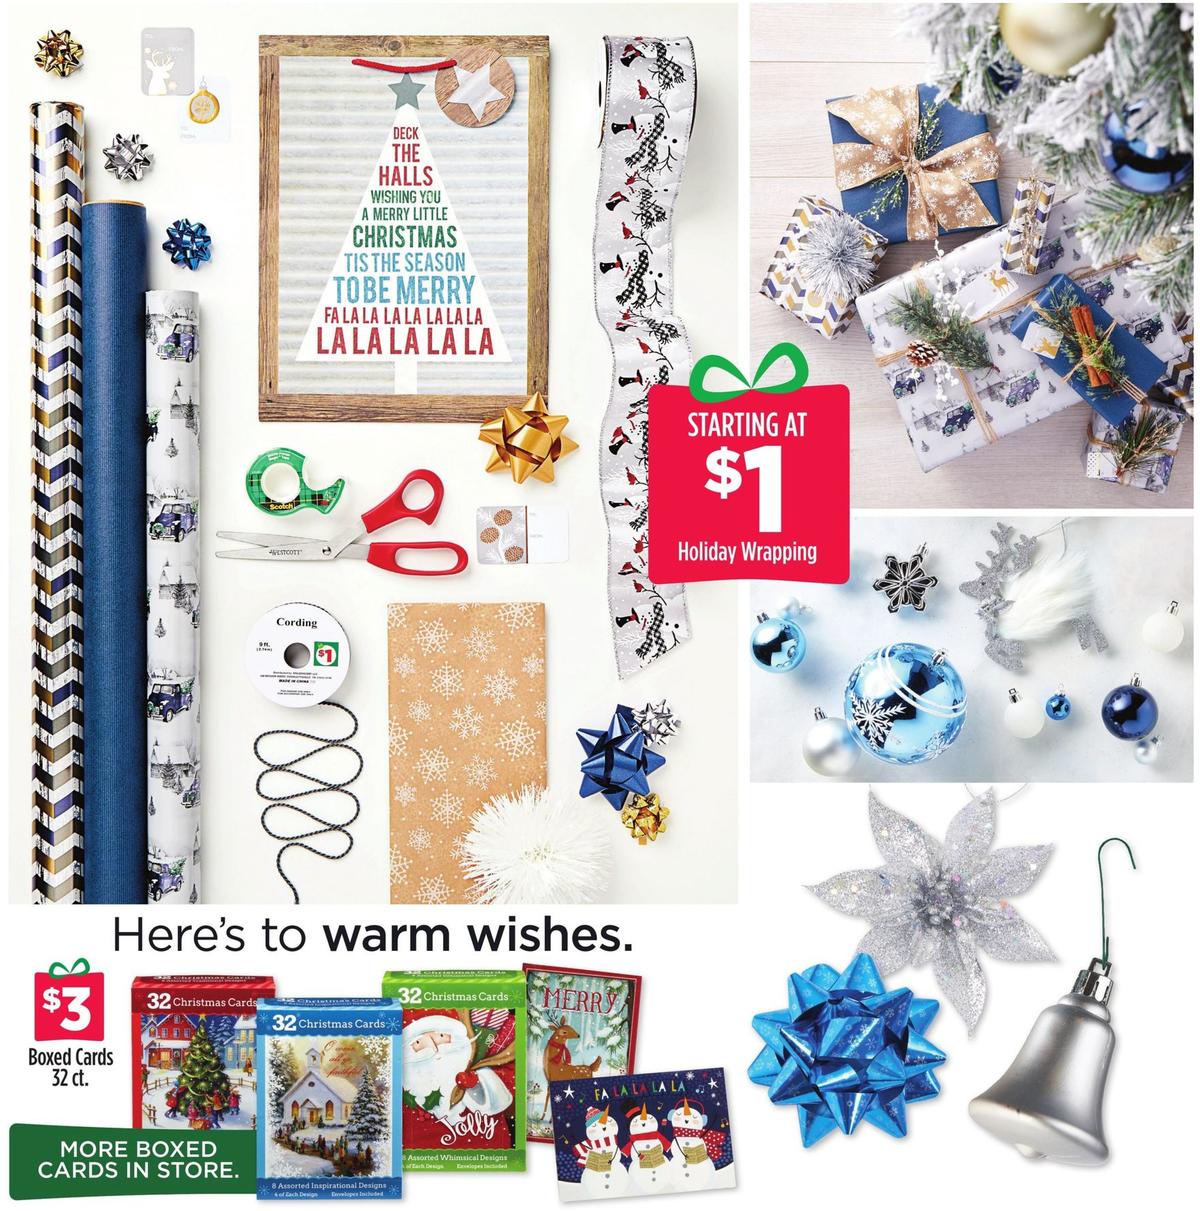 Dollar General Unexpected Holiday Finds Priced Right! Weekly Ad from October 13